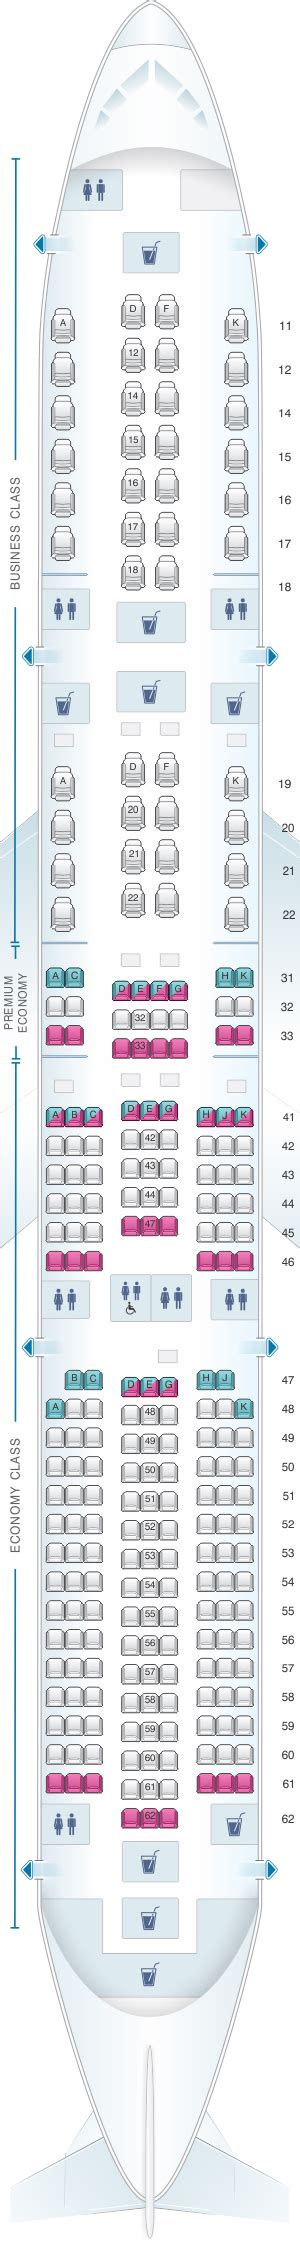 Seat Map Singapore Airlines Airbus A Singapore Airlines Airbus Singapore